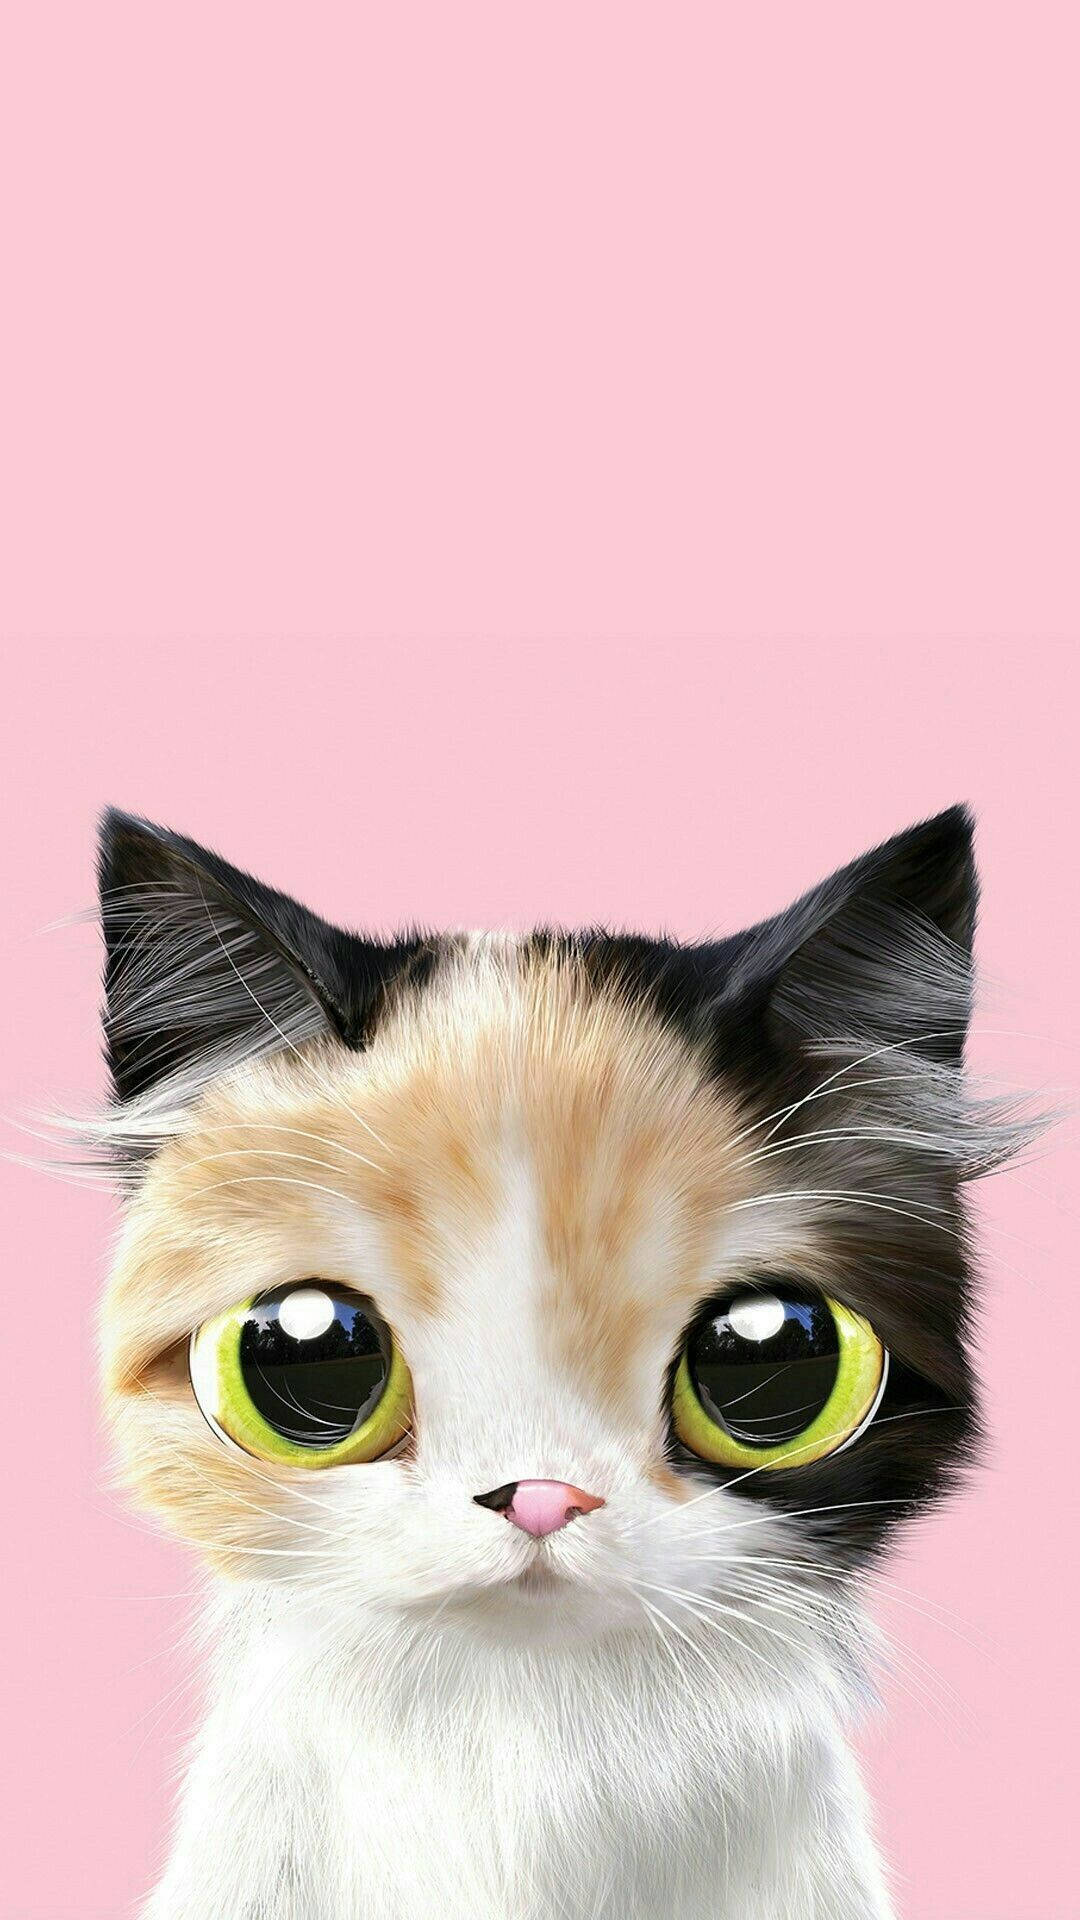 This cute pink cat looks perfect for a cuddle Wallpaper